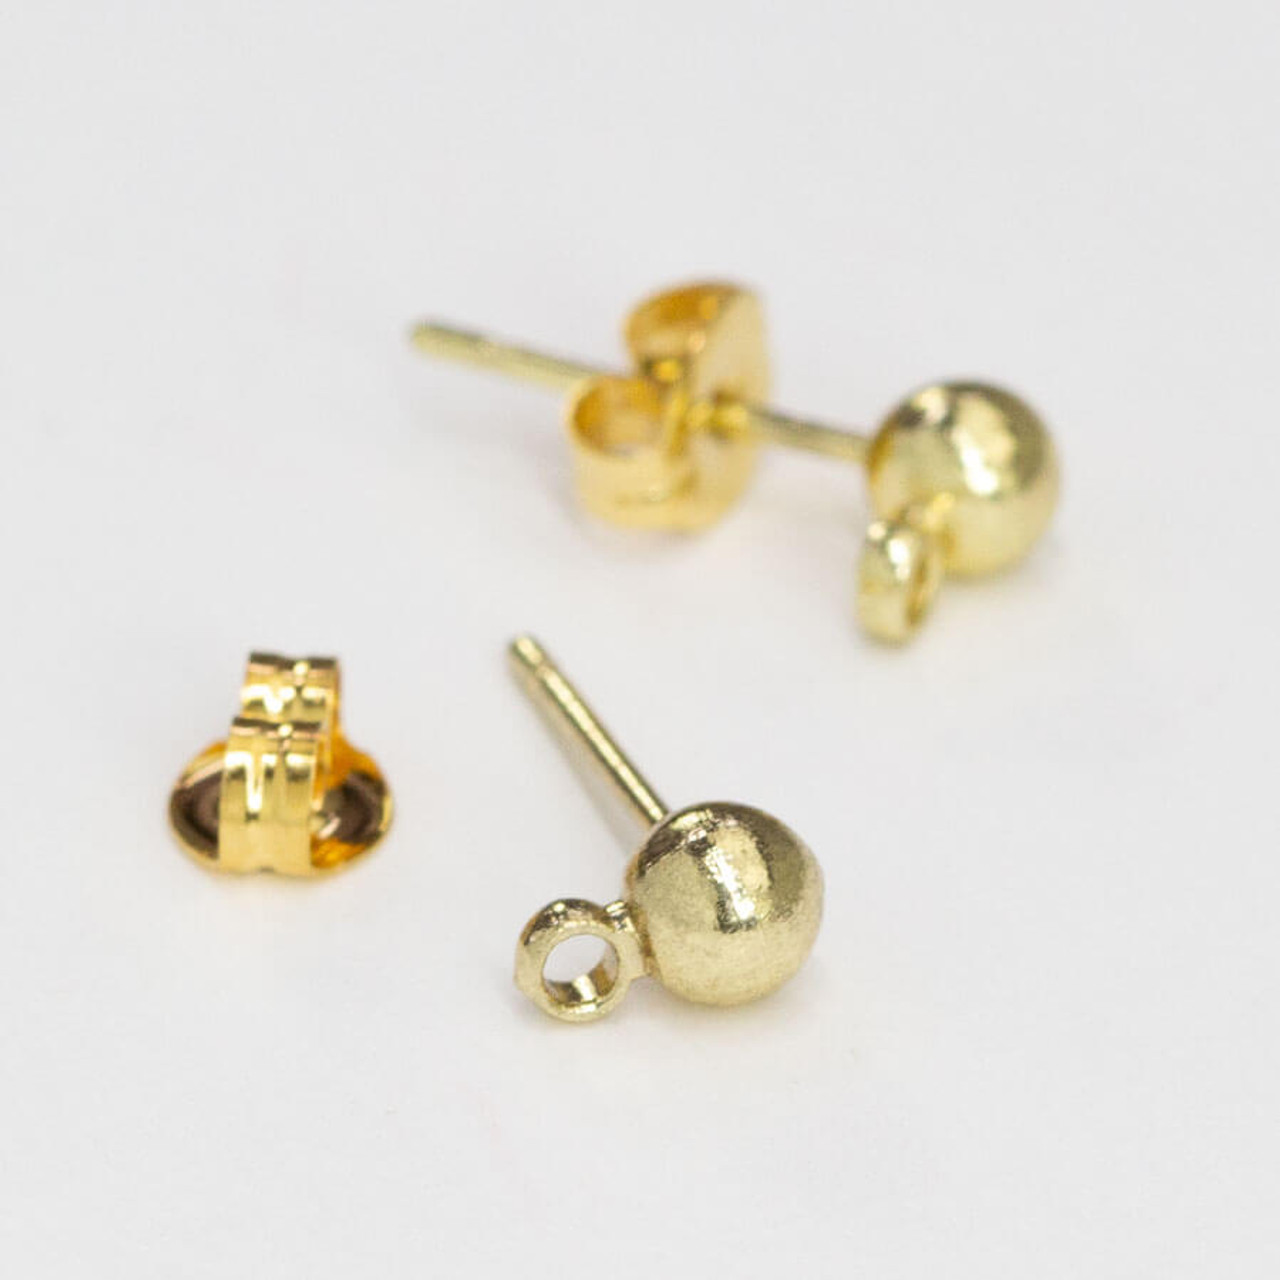 Earring Post with 6mm Ball, Gold-Plated (72 Pieces)